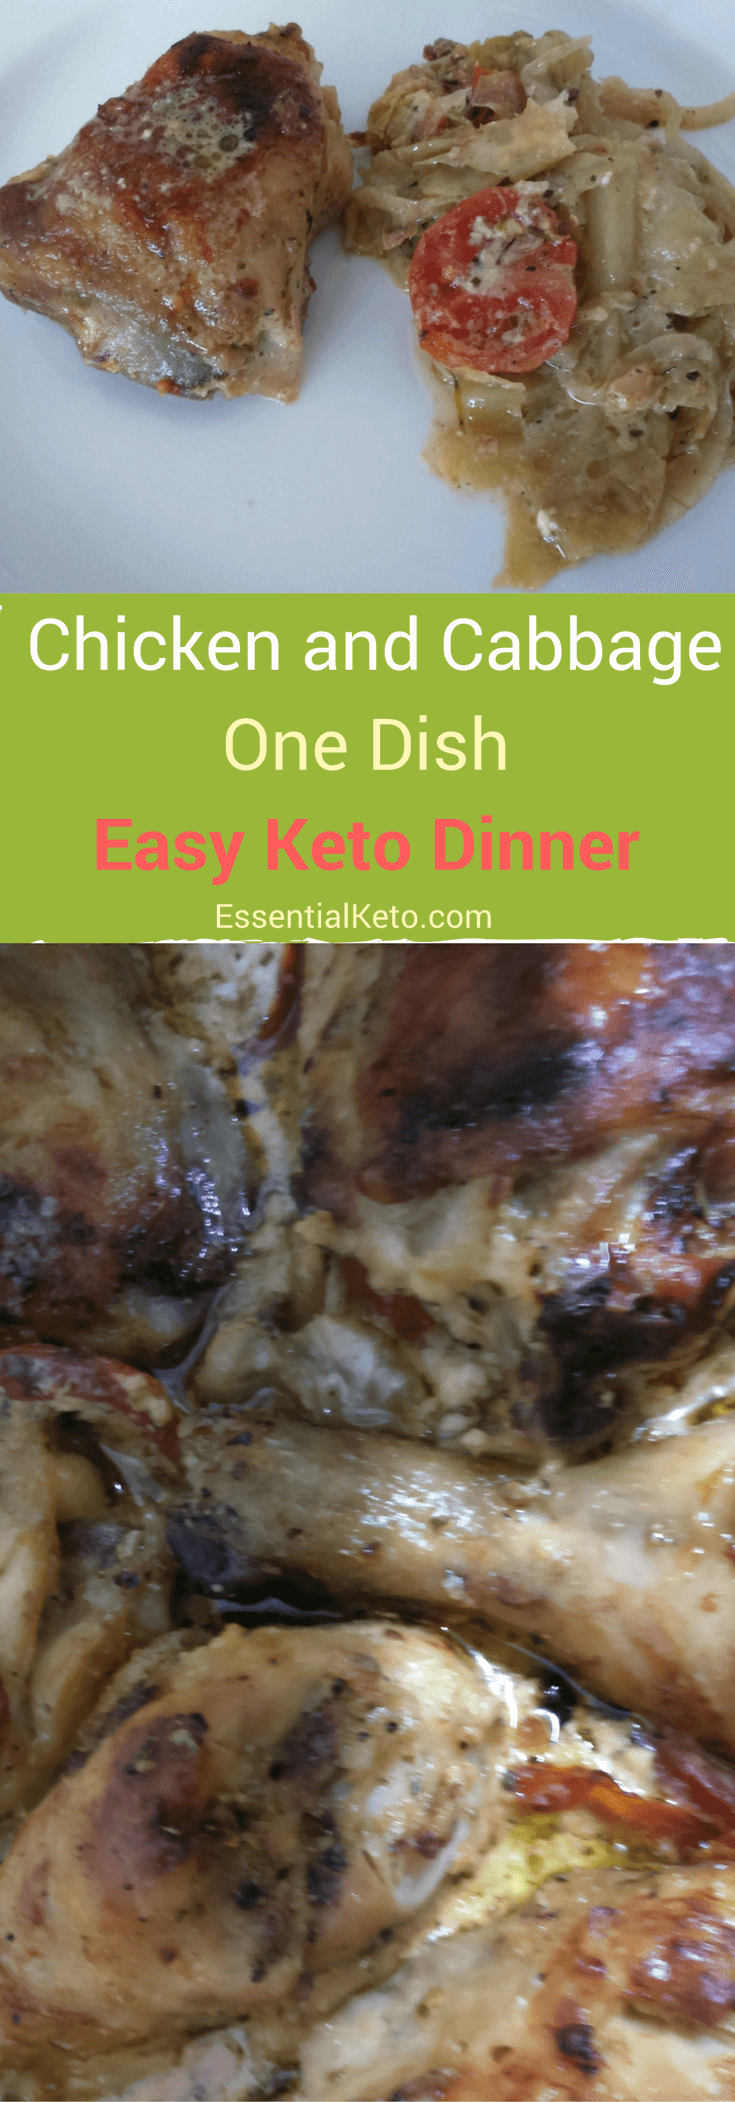 Easy one dish chicken and baby cabbage keto dinner